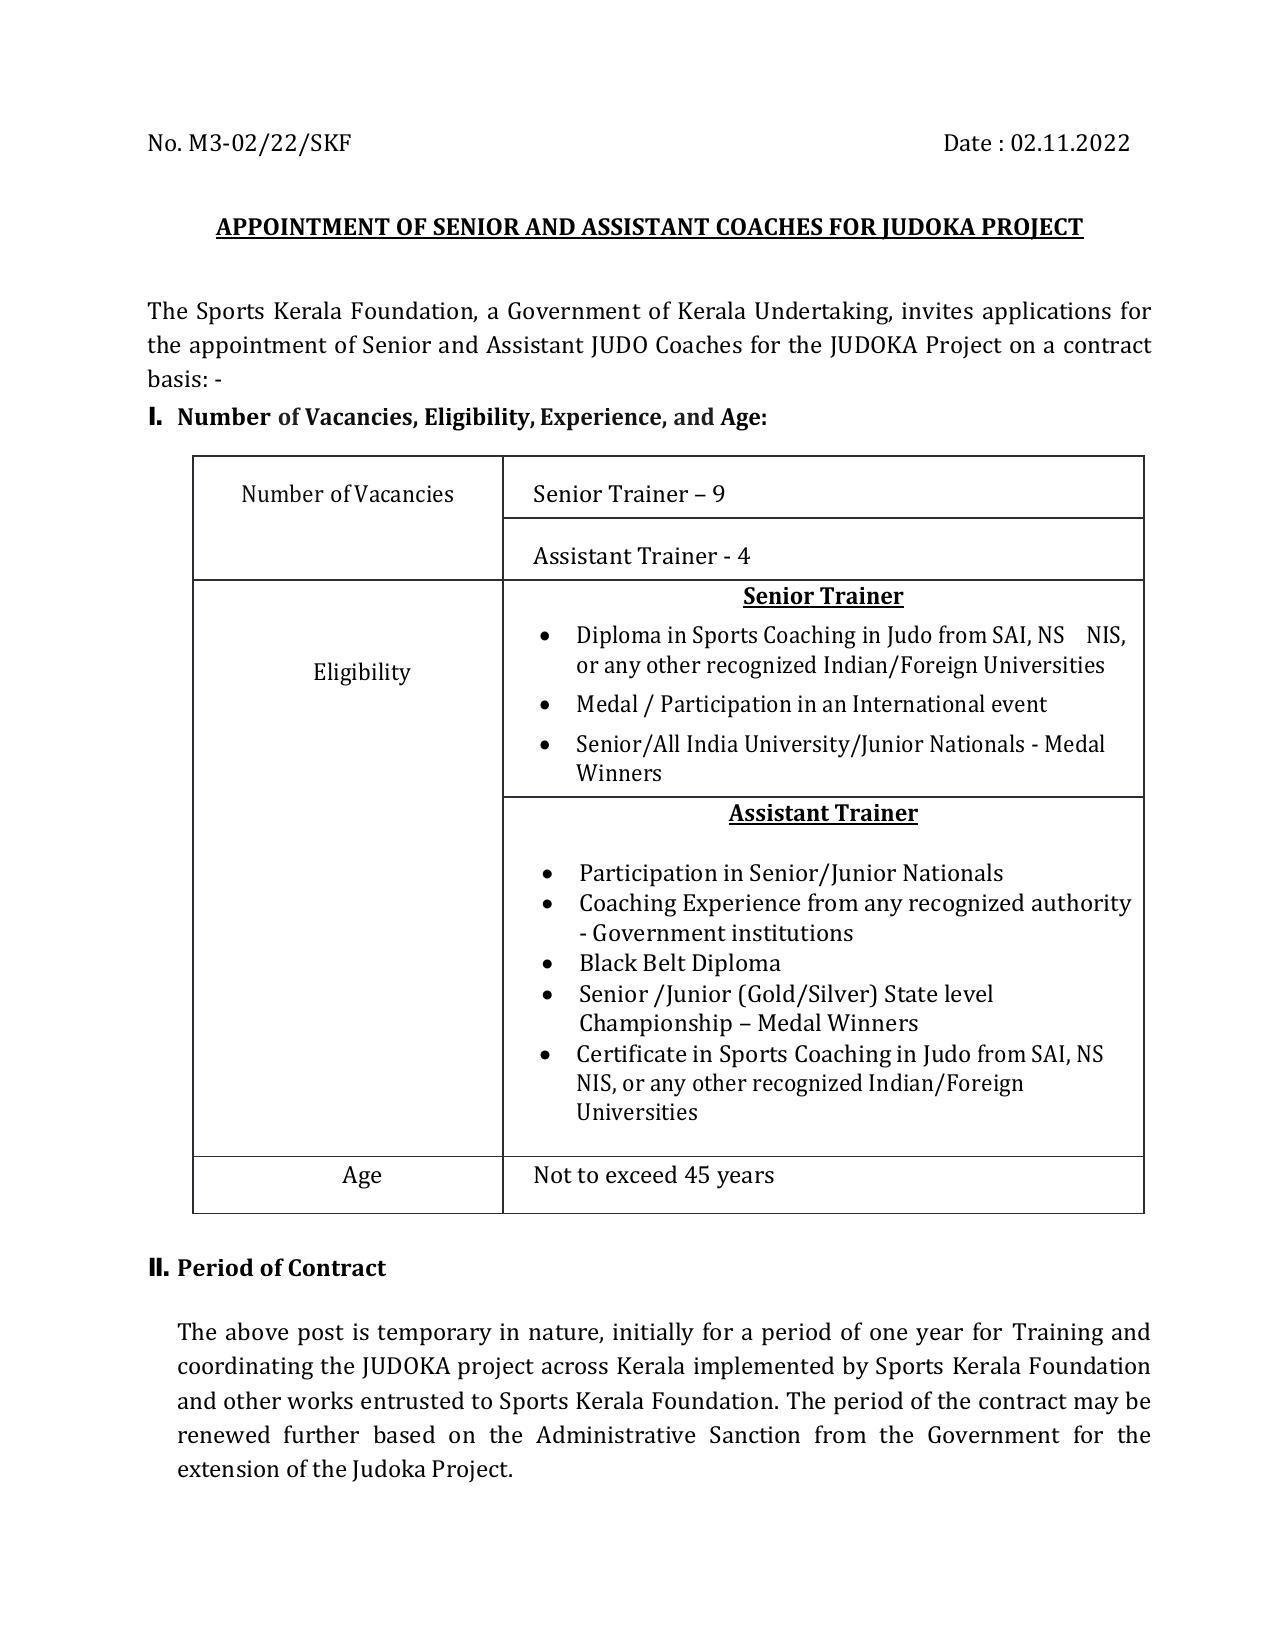 Ministry of Youth Affairs & Sports Invites Application for 13 Senior Trainer, Assistant Trainer Recruitment 2022 - Page 3